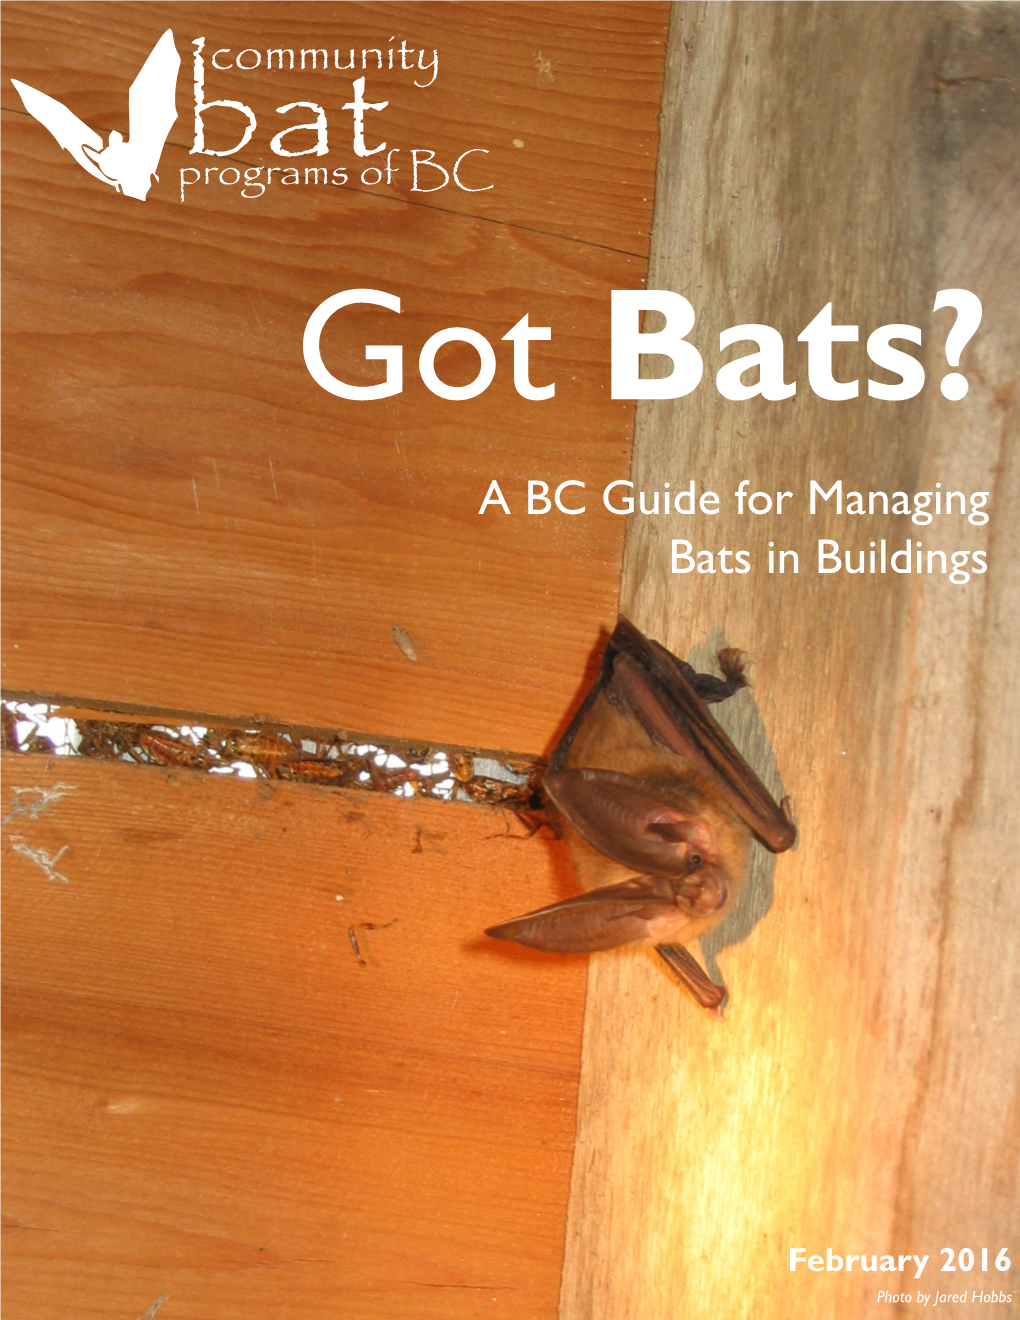 Got Bats? a BC Guide for Managing Bats in Buildings